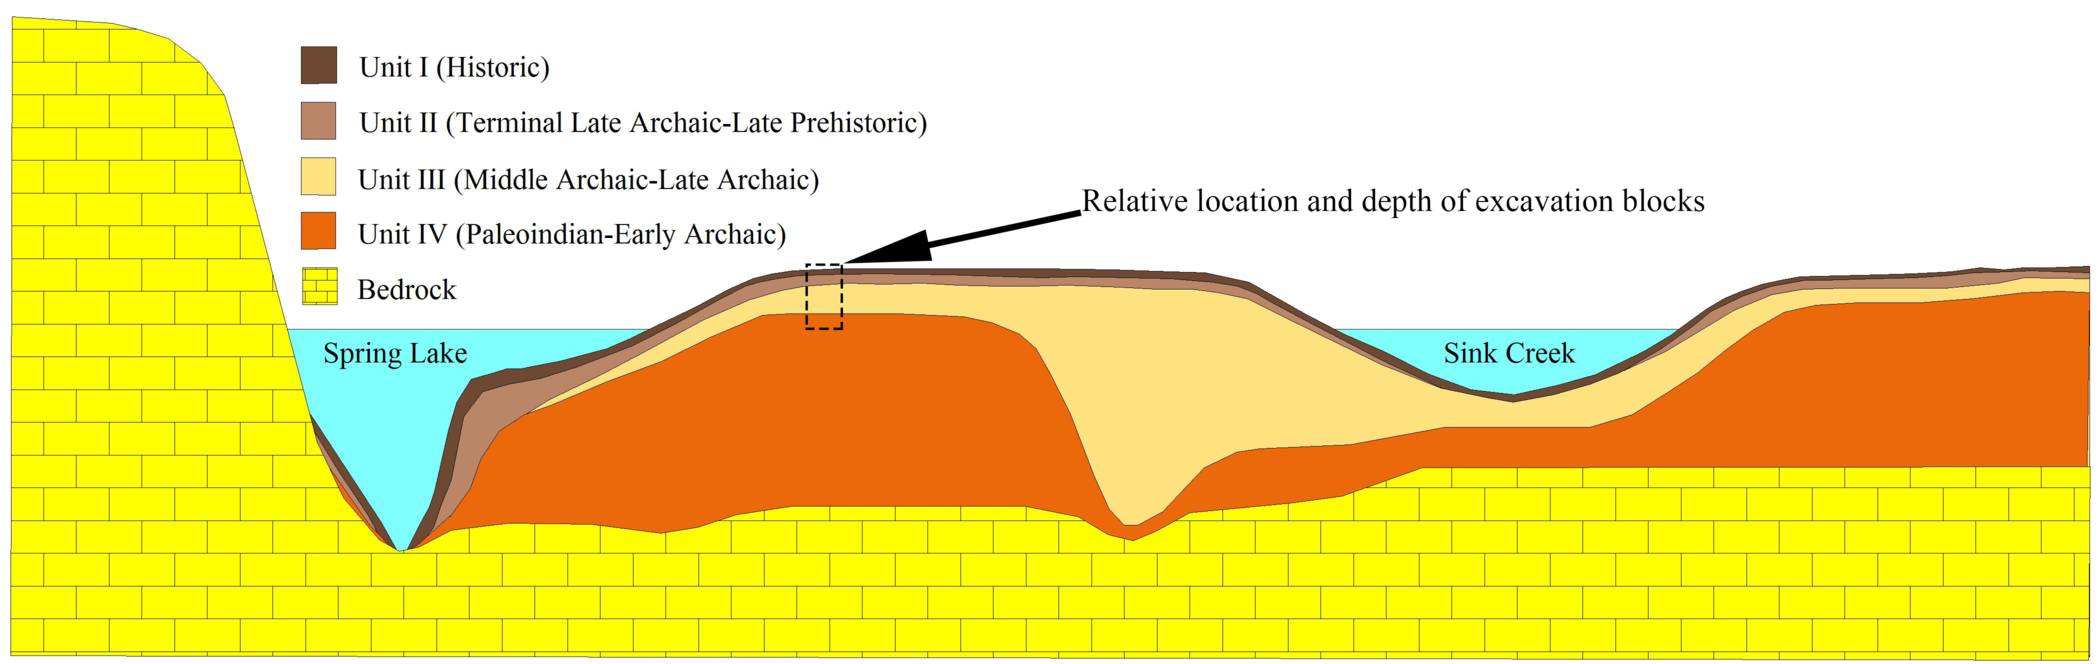 Idealized Cross Section of Spring Lake Peninsula